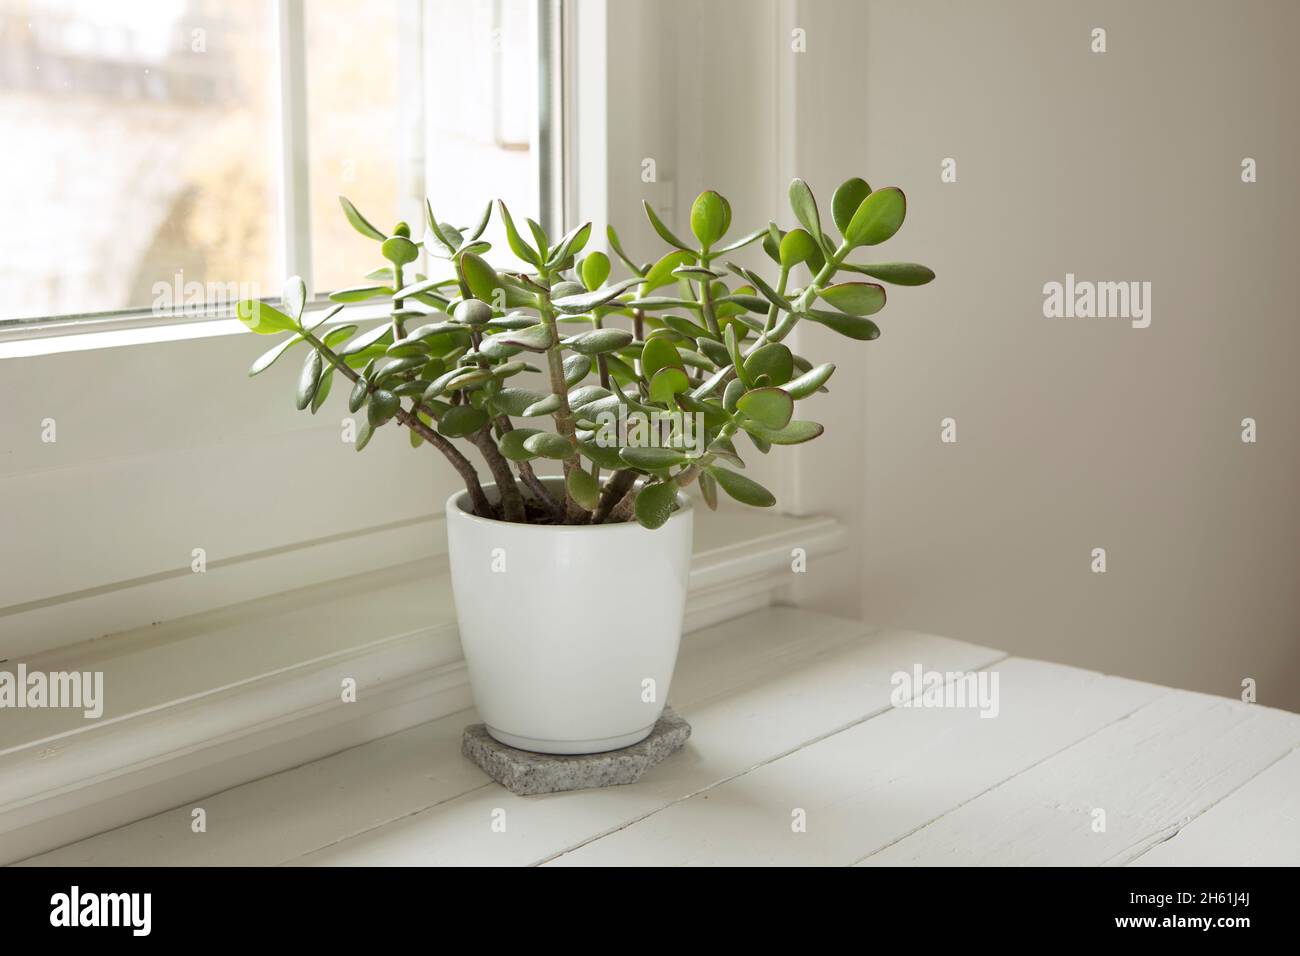 Pottet plant Crassula ovata, jade plant at home. House plant in pot on window sill with lush green leaves. Succulent in home garden. Stock Photo